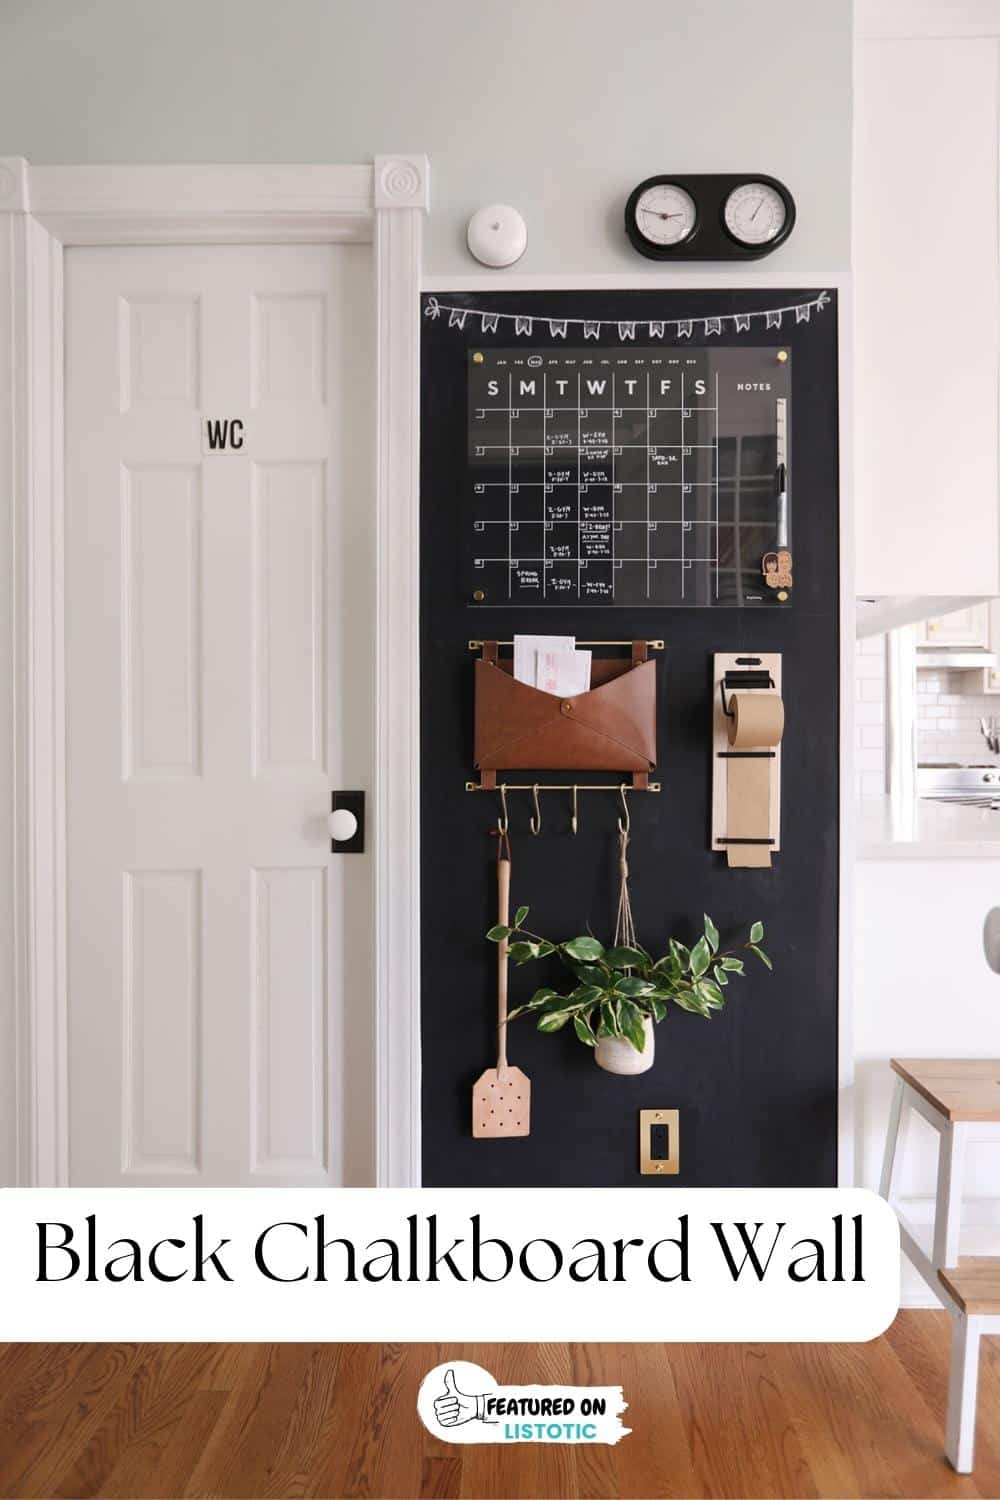 black chalkboard wall with calendar and catch all container on wall